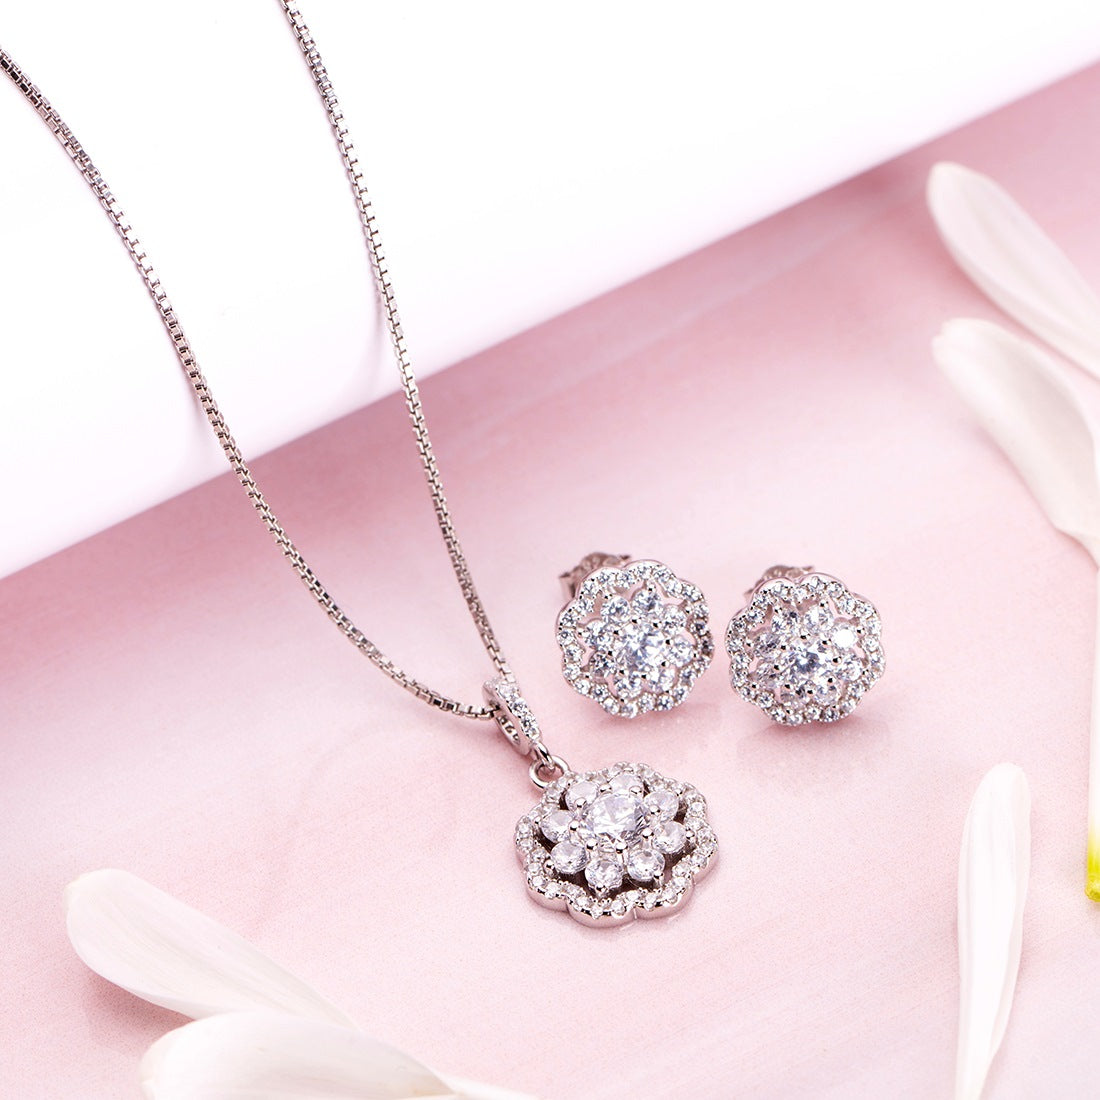 Radiant Blossom Rhodium Plated 925 Sterling Silver Jewelry Set